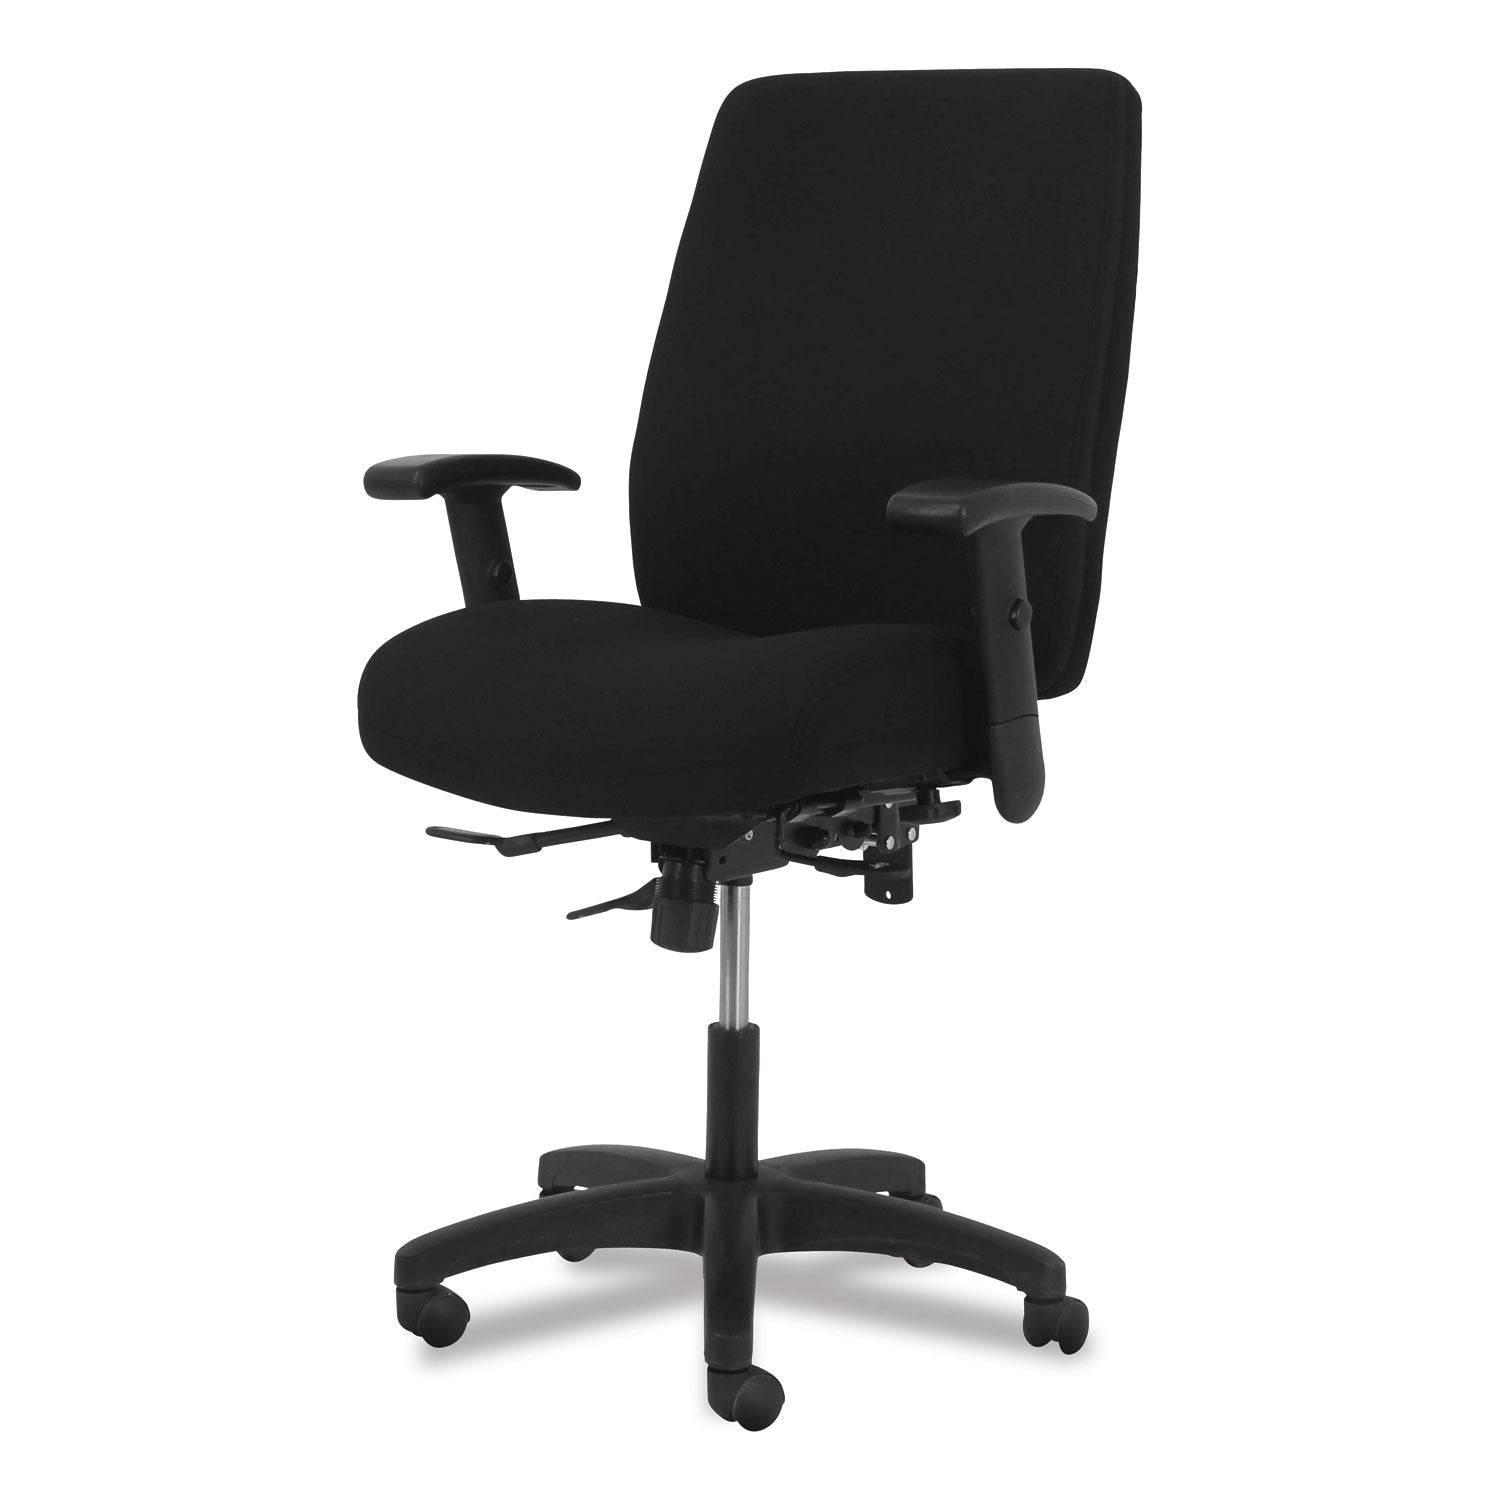 network-high-back-chair-supports-up-to-250-lb-183-to-228-seat-height-black_honvl283a2va10t - 6